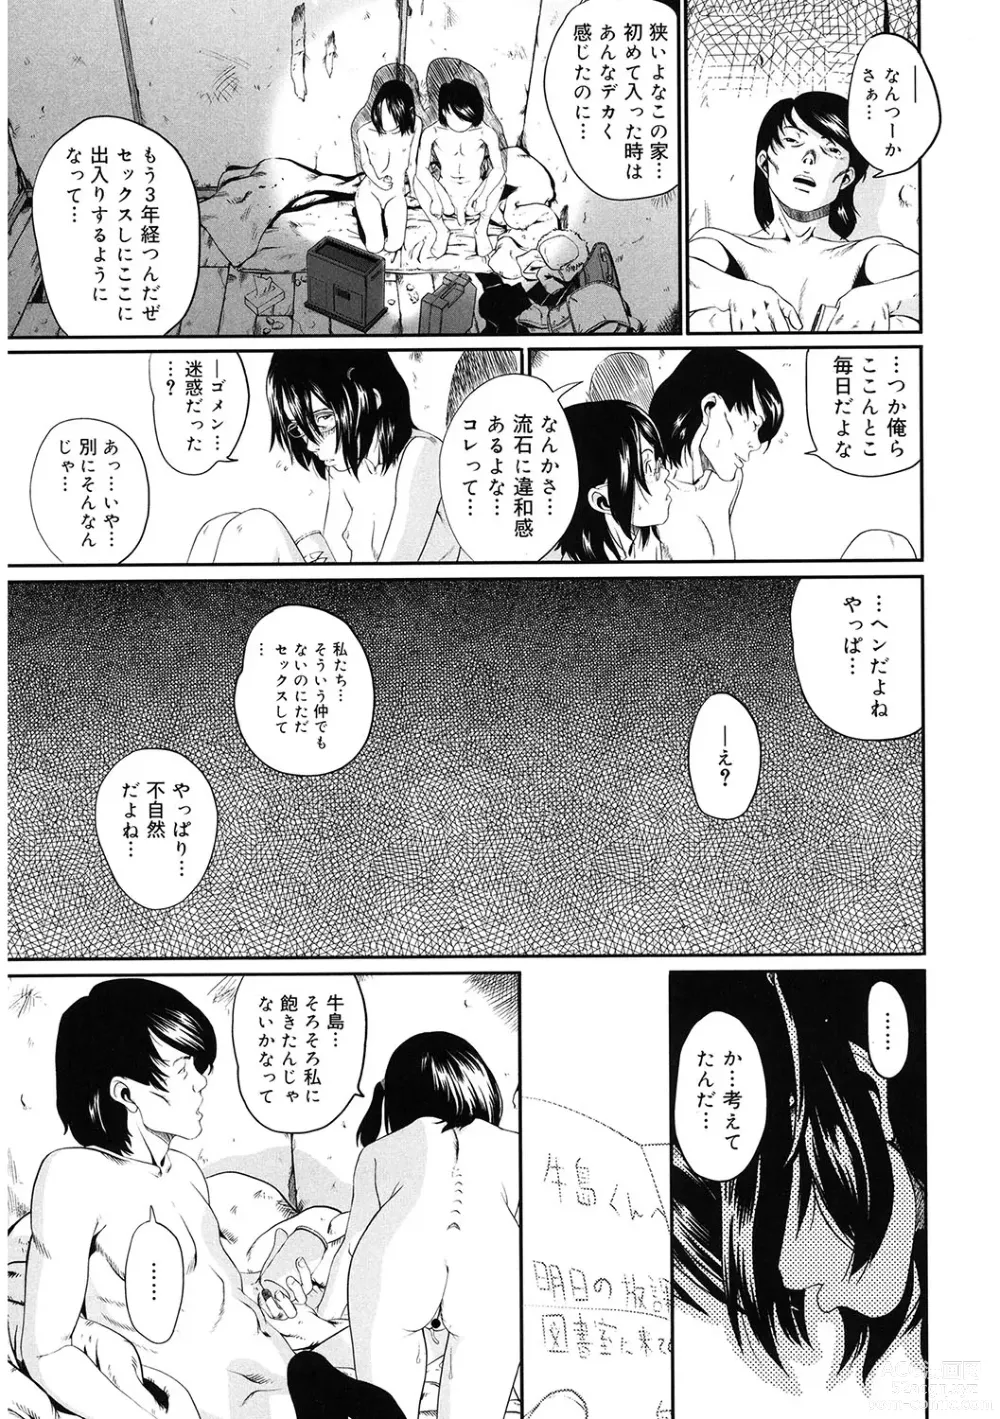 Page 168 of manga LQ -Little Queen- Vol. 54